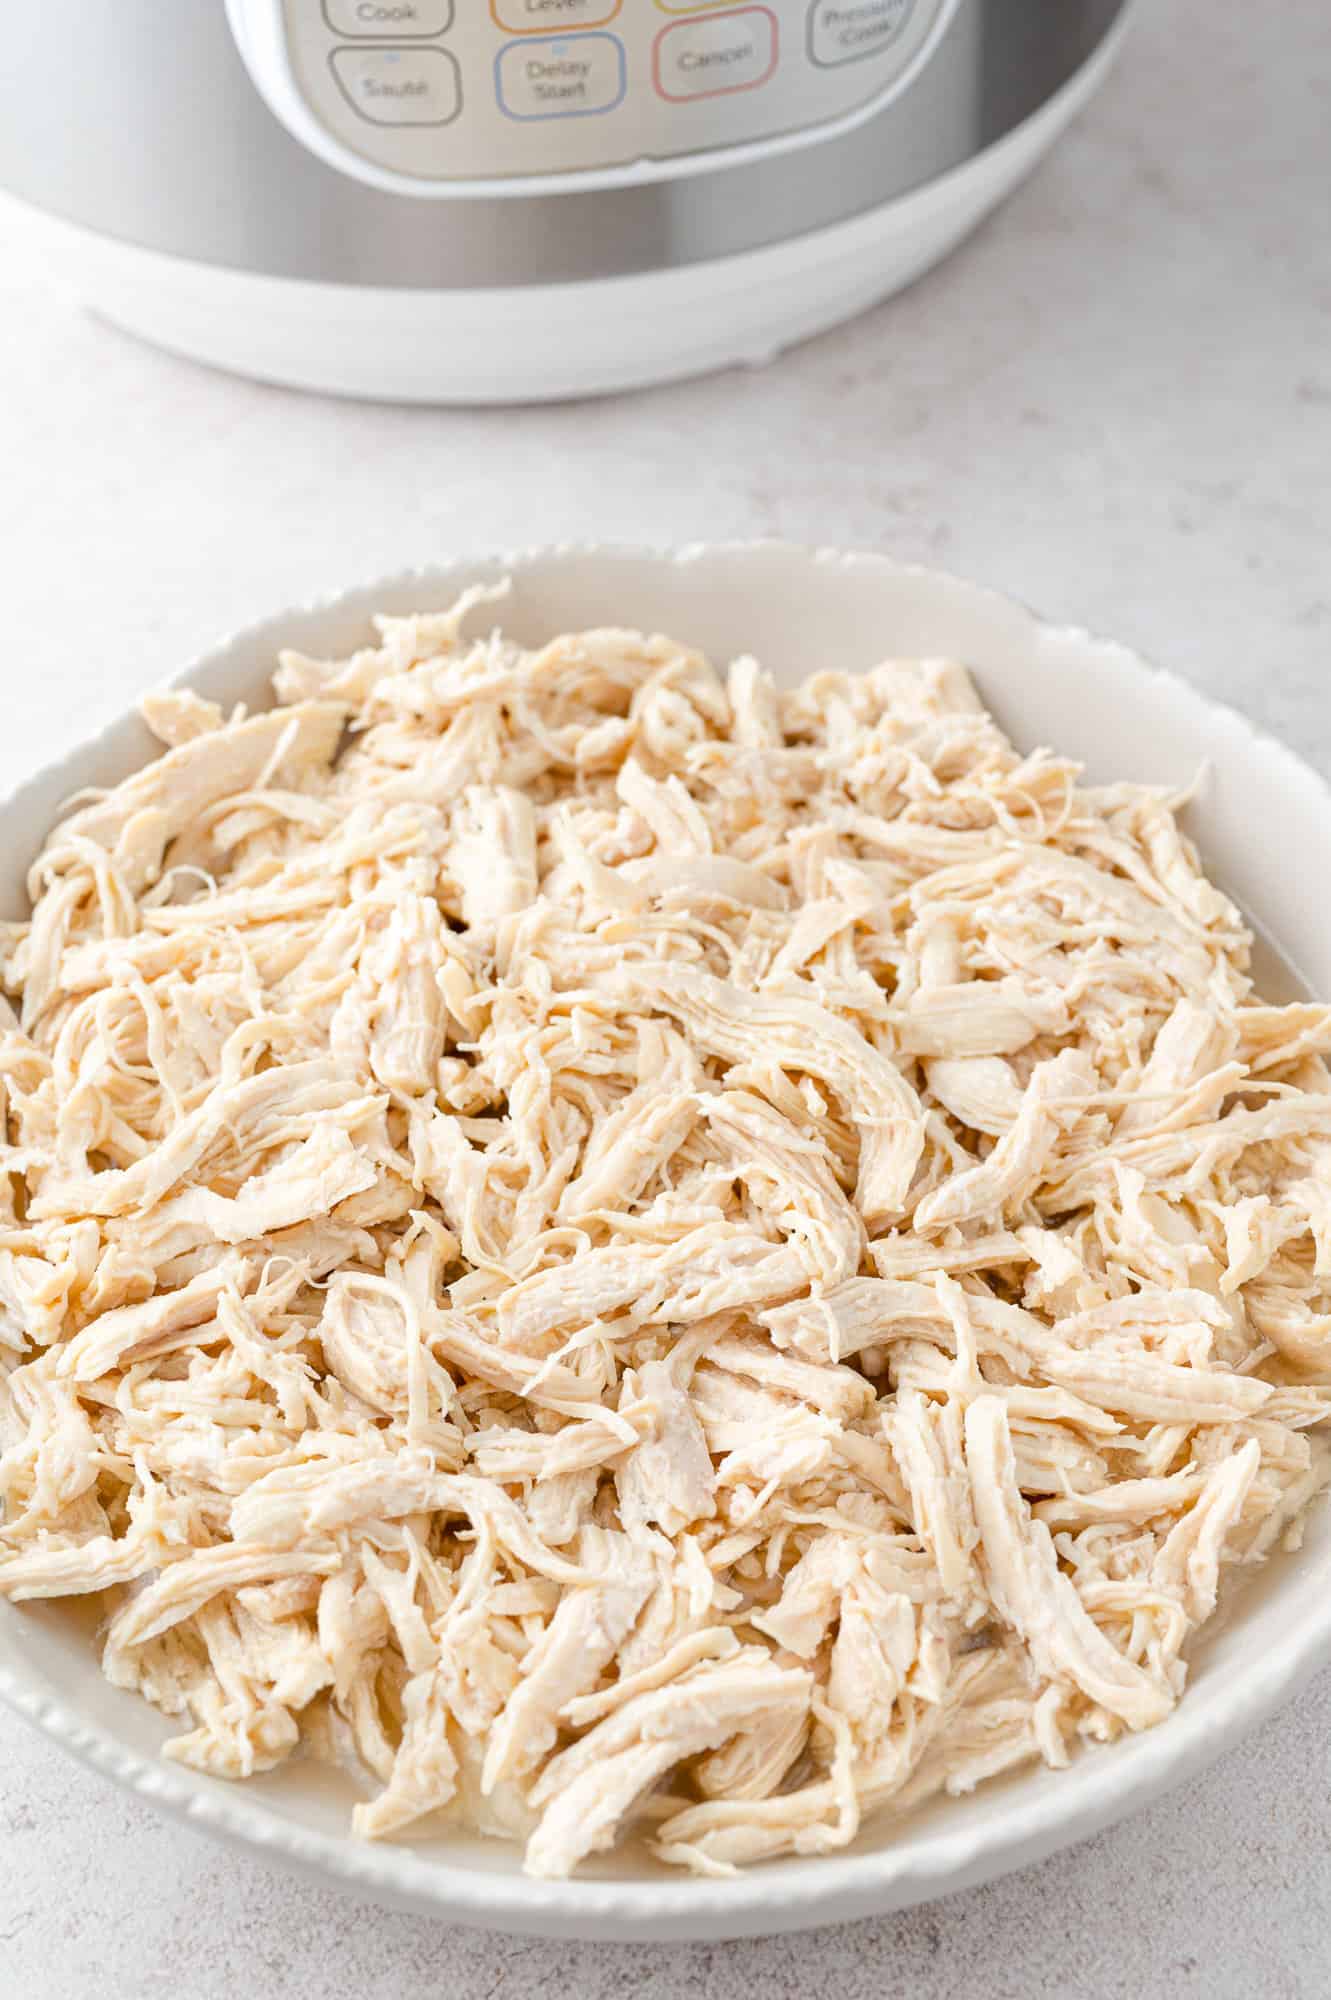 Instant Pot shredded chicken in a large white bowl.